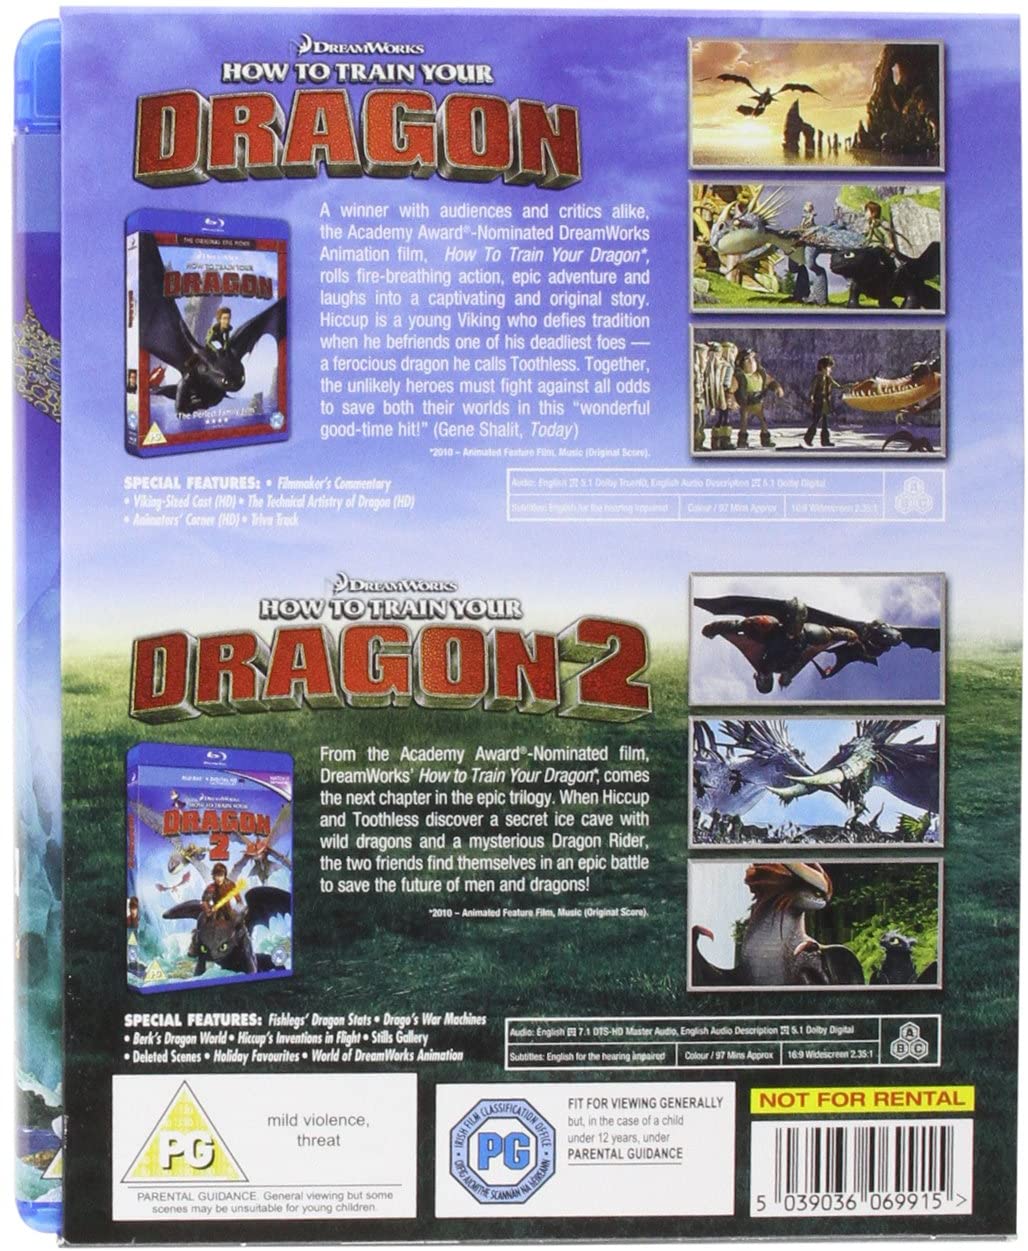 How To Train Your Dragon/How To Train Your Dragon 2 [Region Free] -  Family/Adventure [Blu-ray]